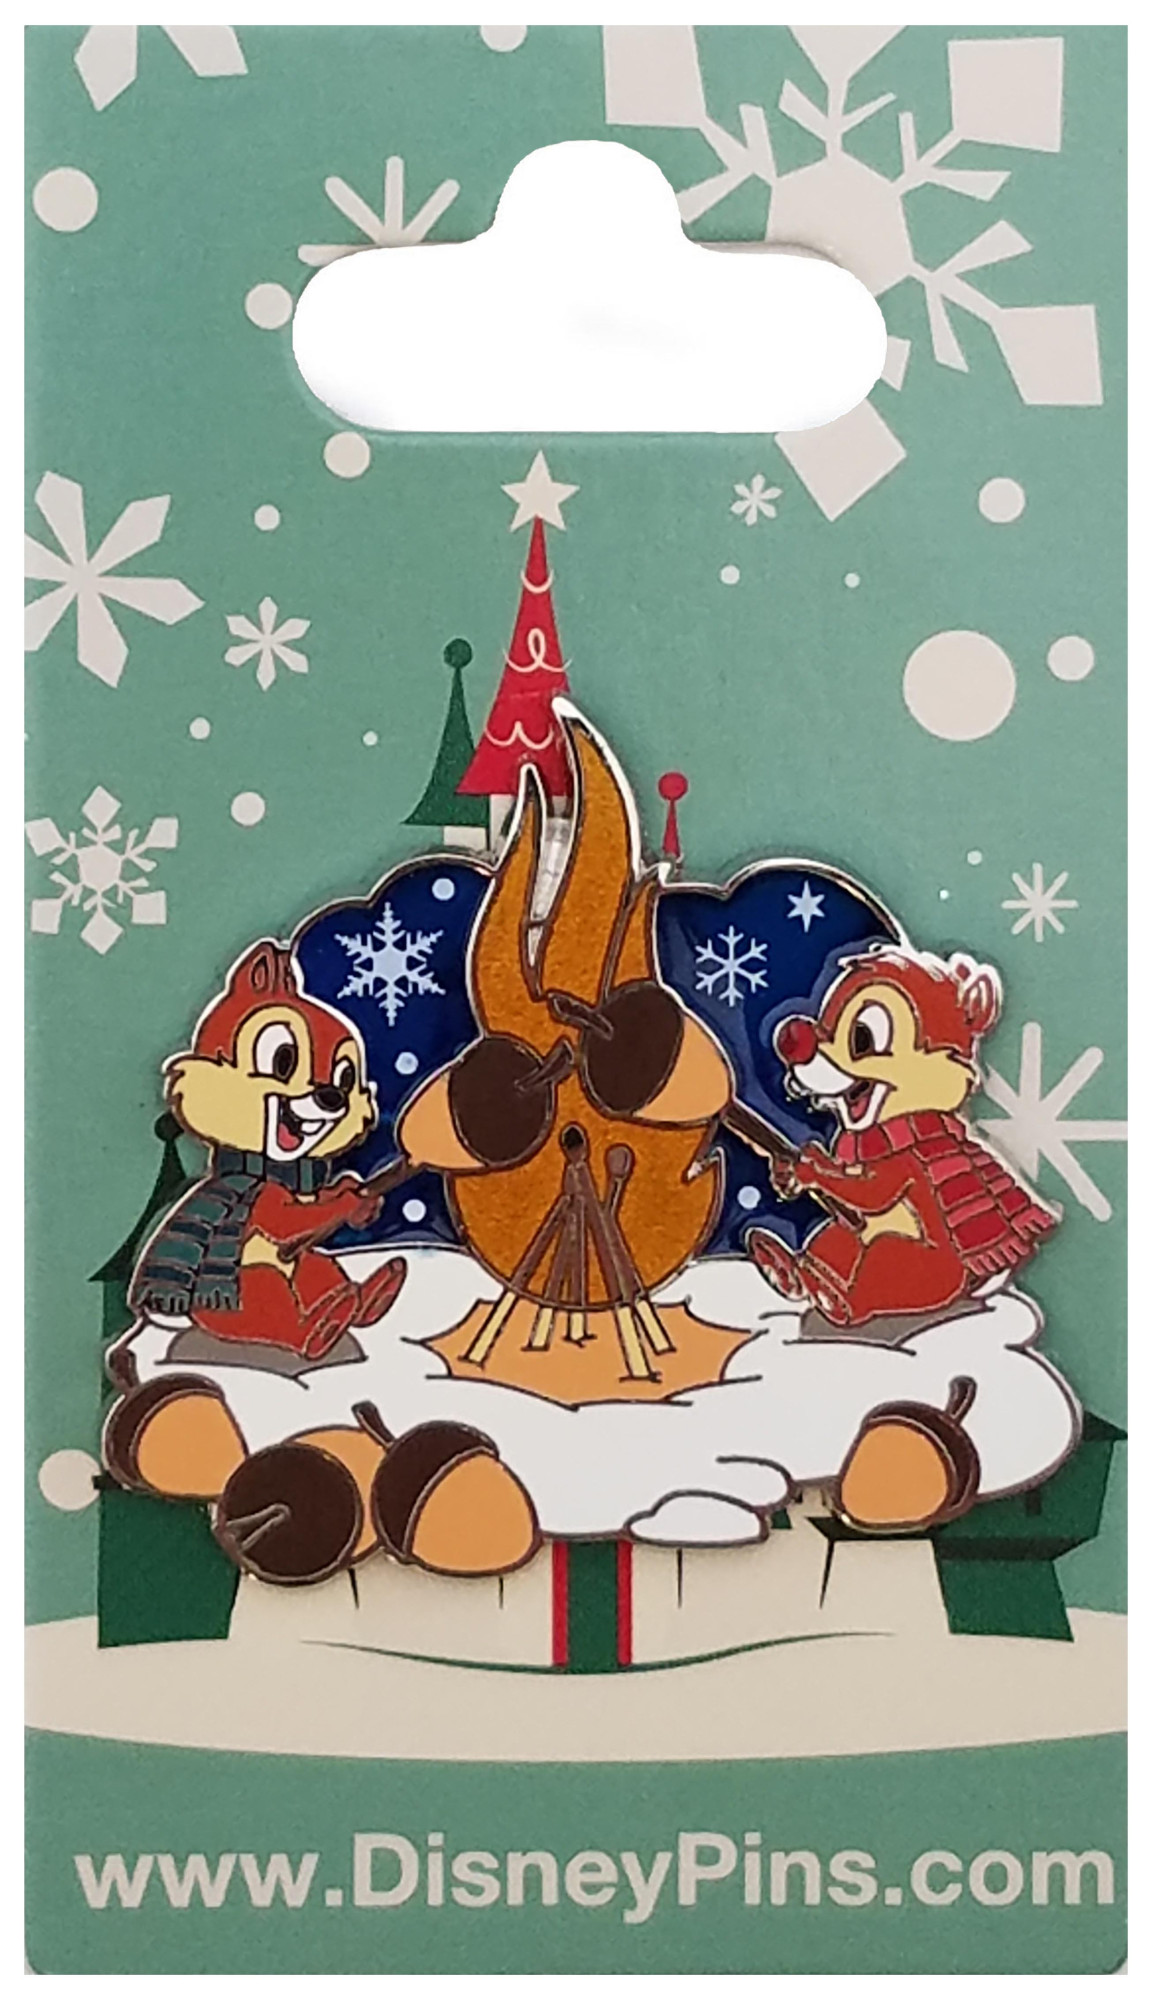 products Disney Pin - Christmas Holiday 2016 - Chip and Dale - Roasting Acorns